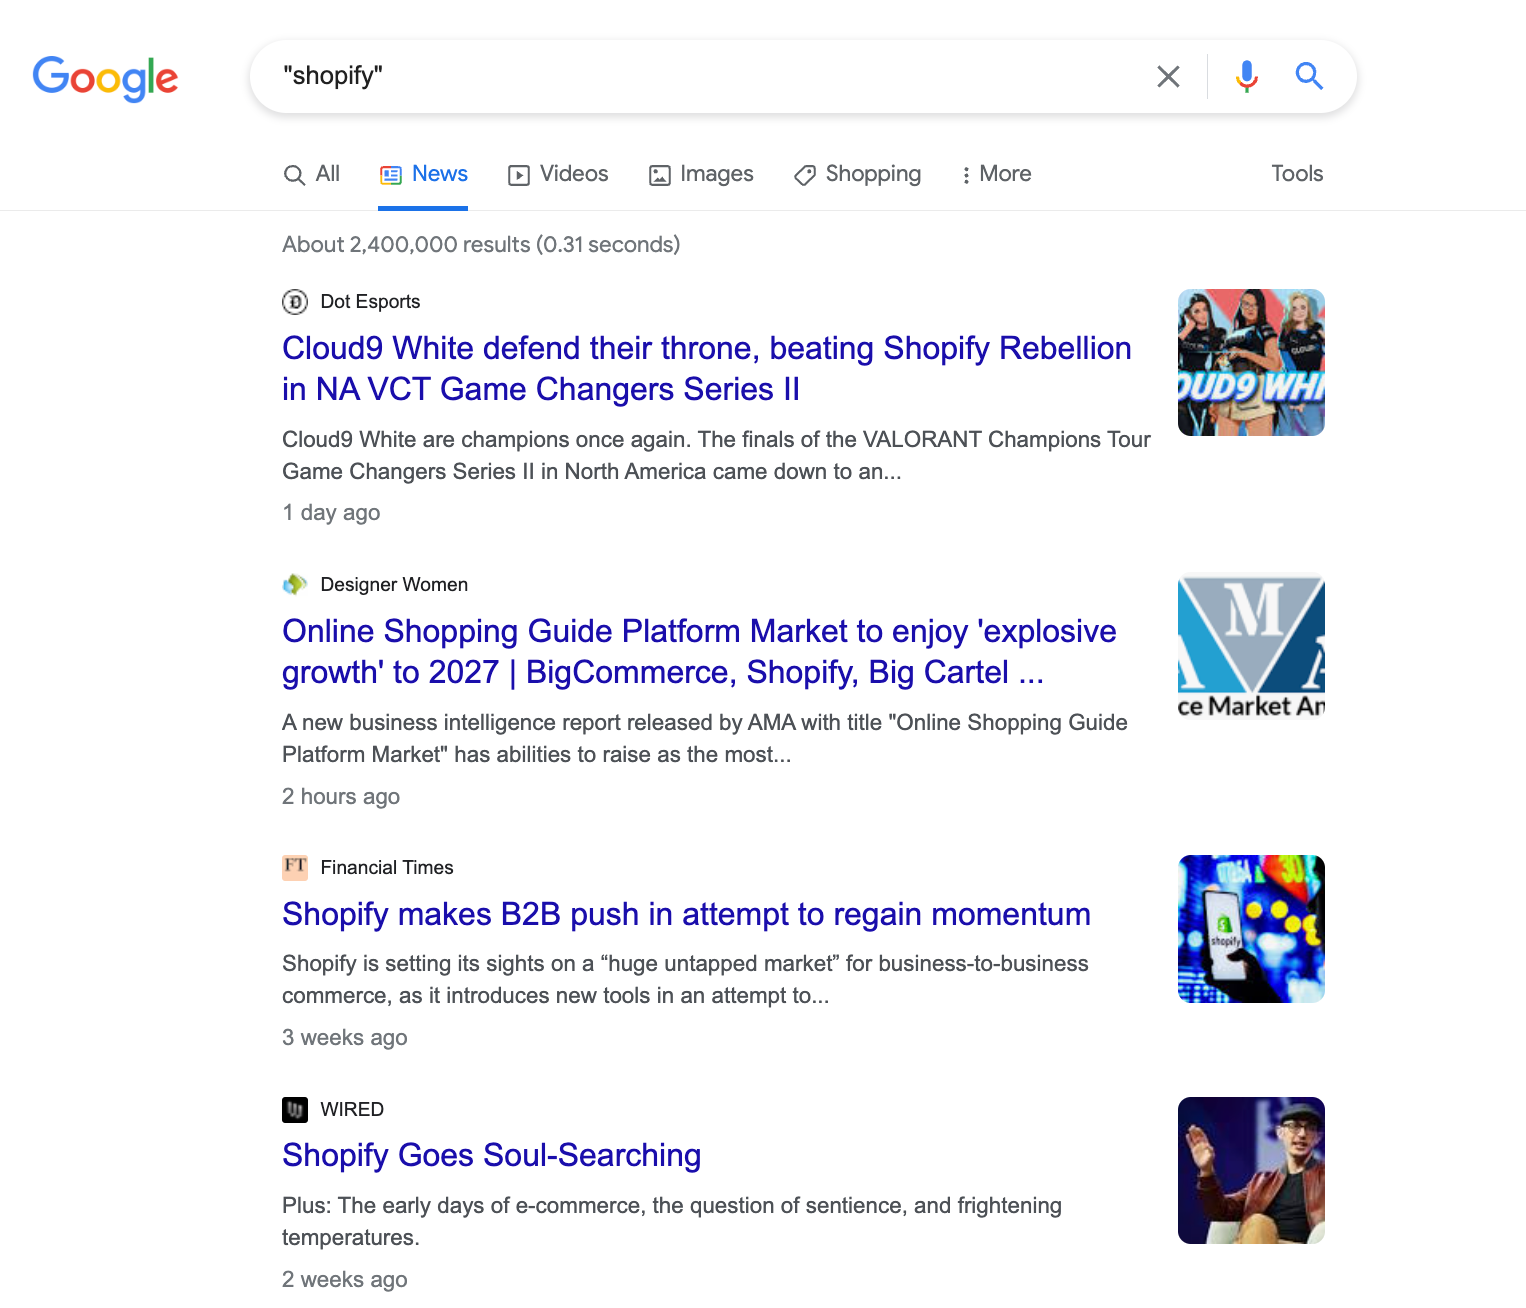 Google search results for “Shopify.”